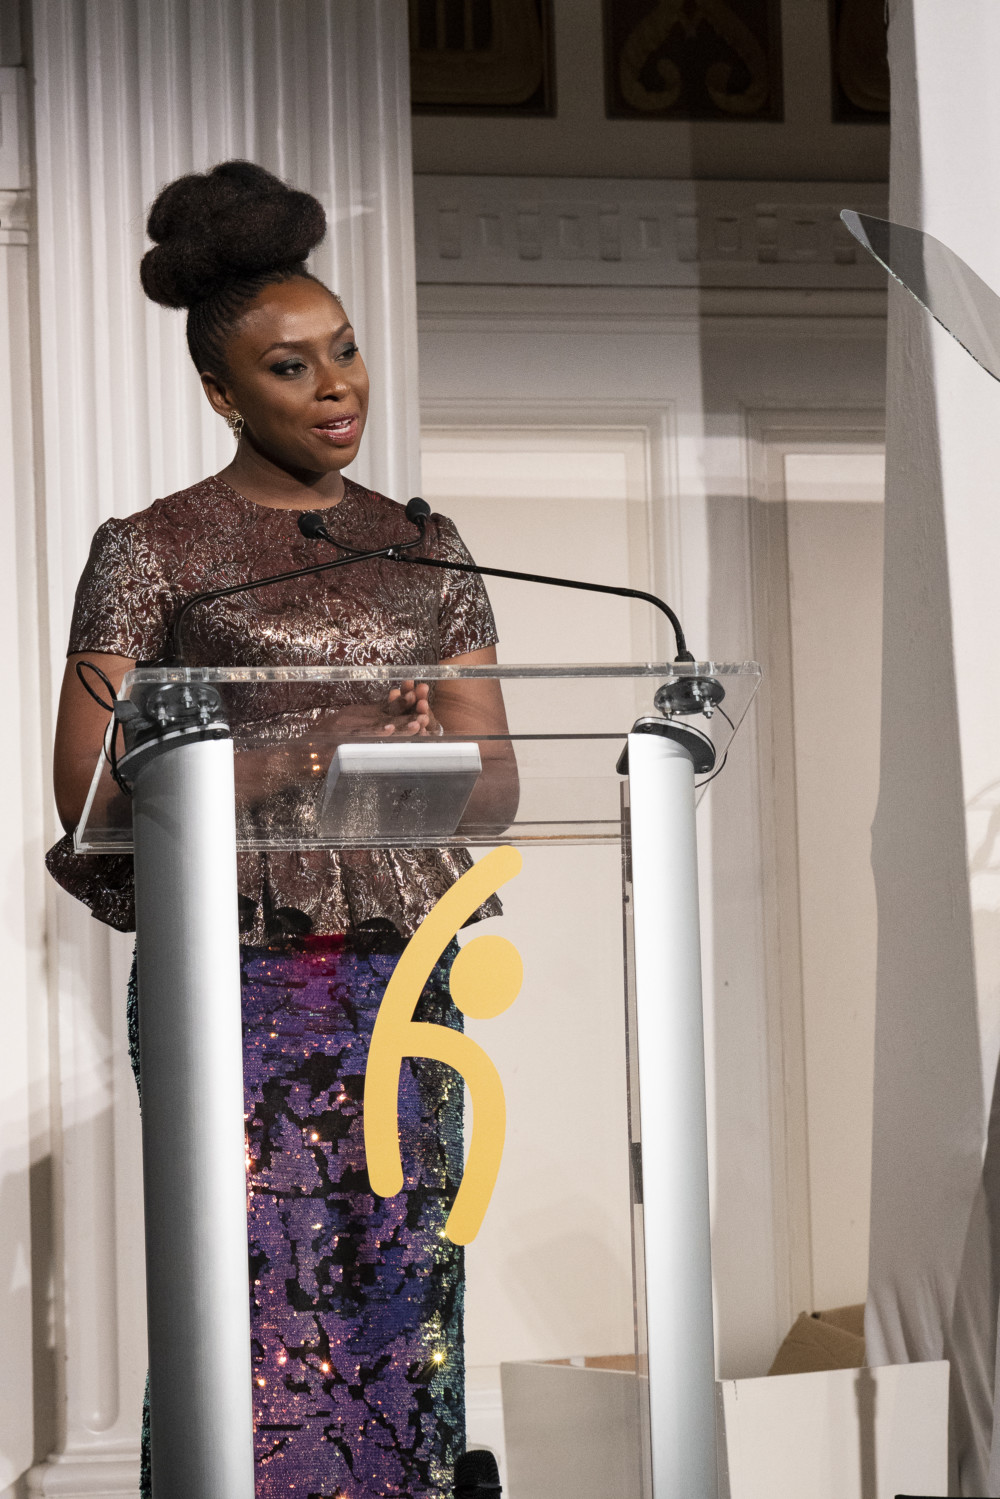 Chimamanda Ngozi Adichie receives ‘special distinction for thought leadership’ award in New York